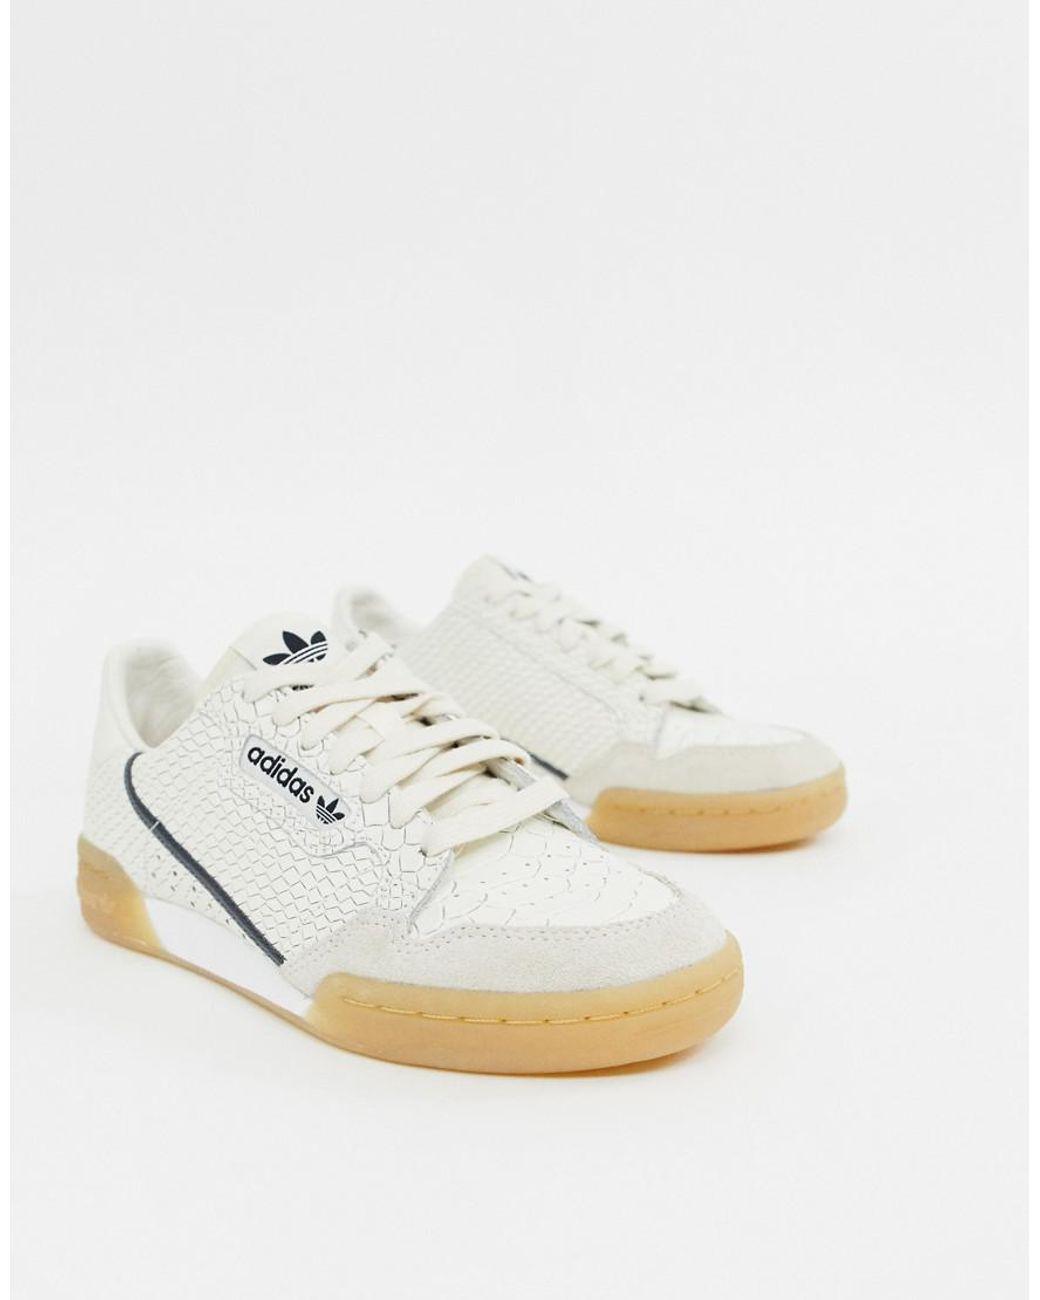 adidas Originals Continental 80 Sneakers In White Snakeskin With Gum Sole |  Lyst